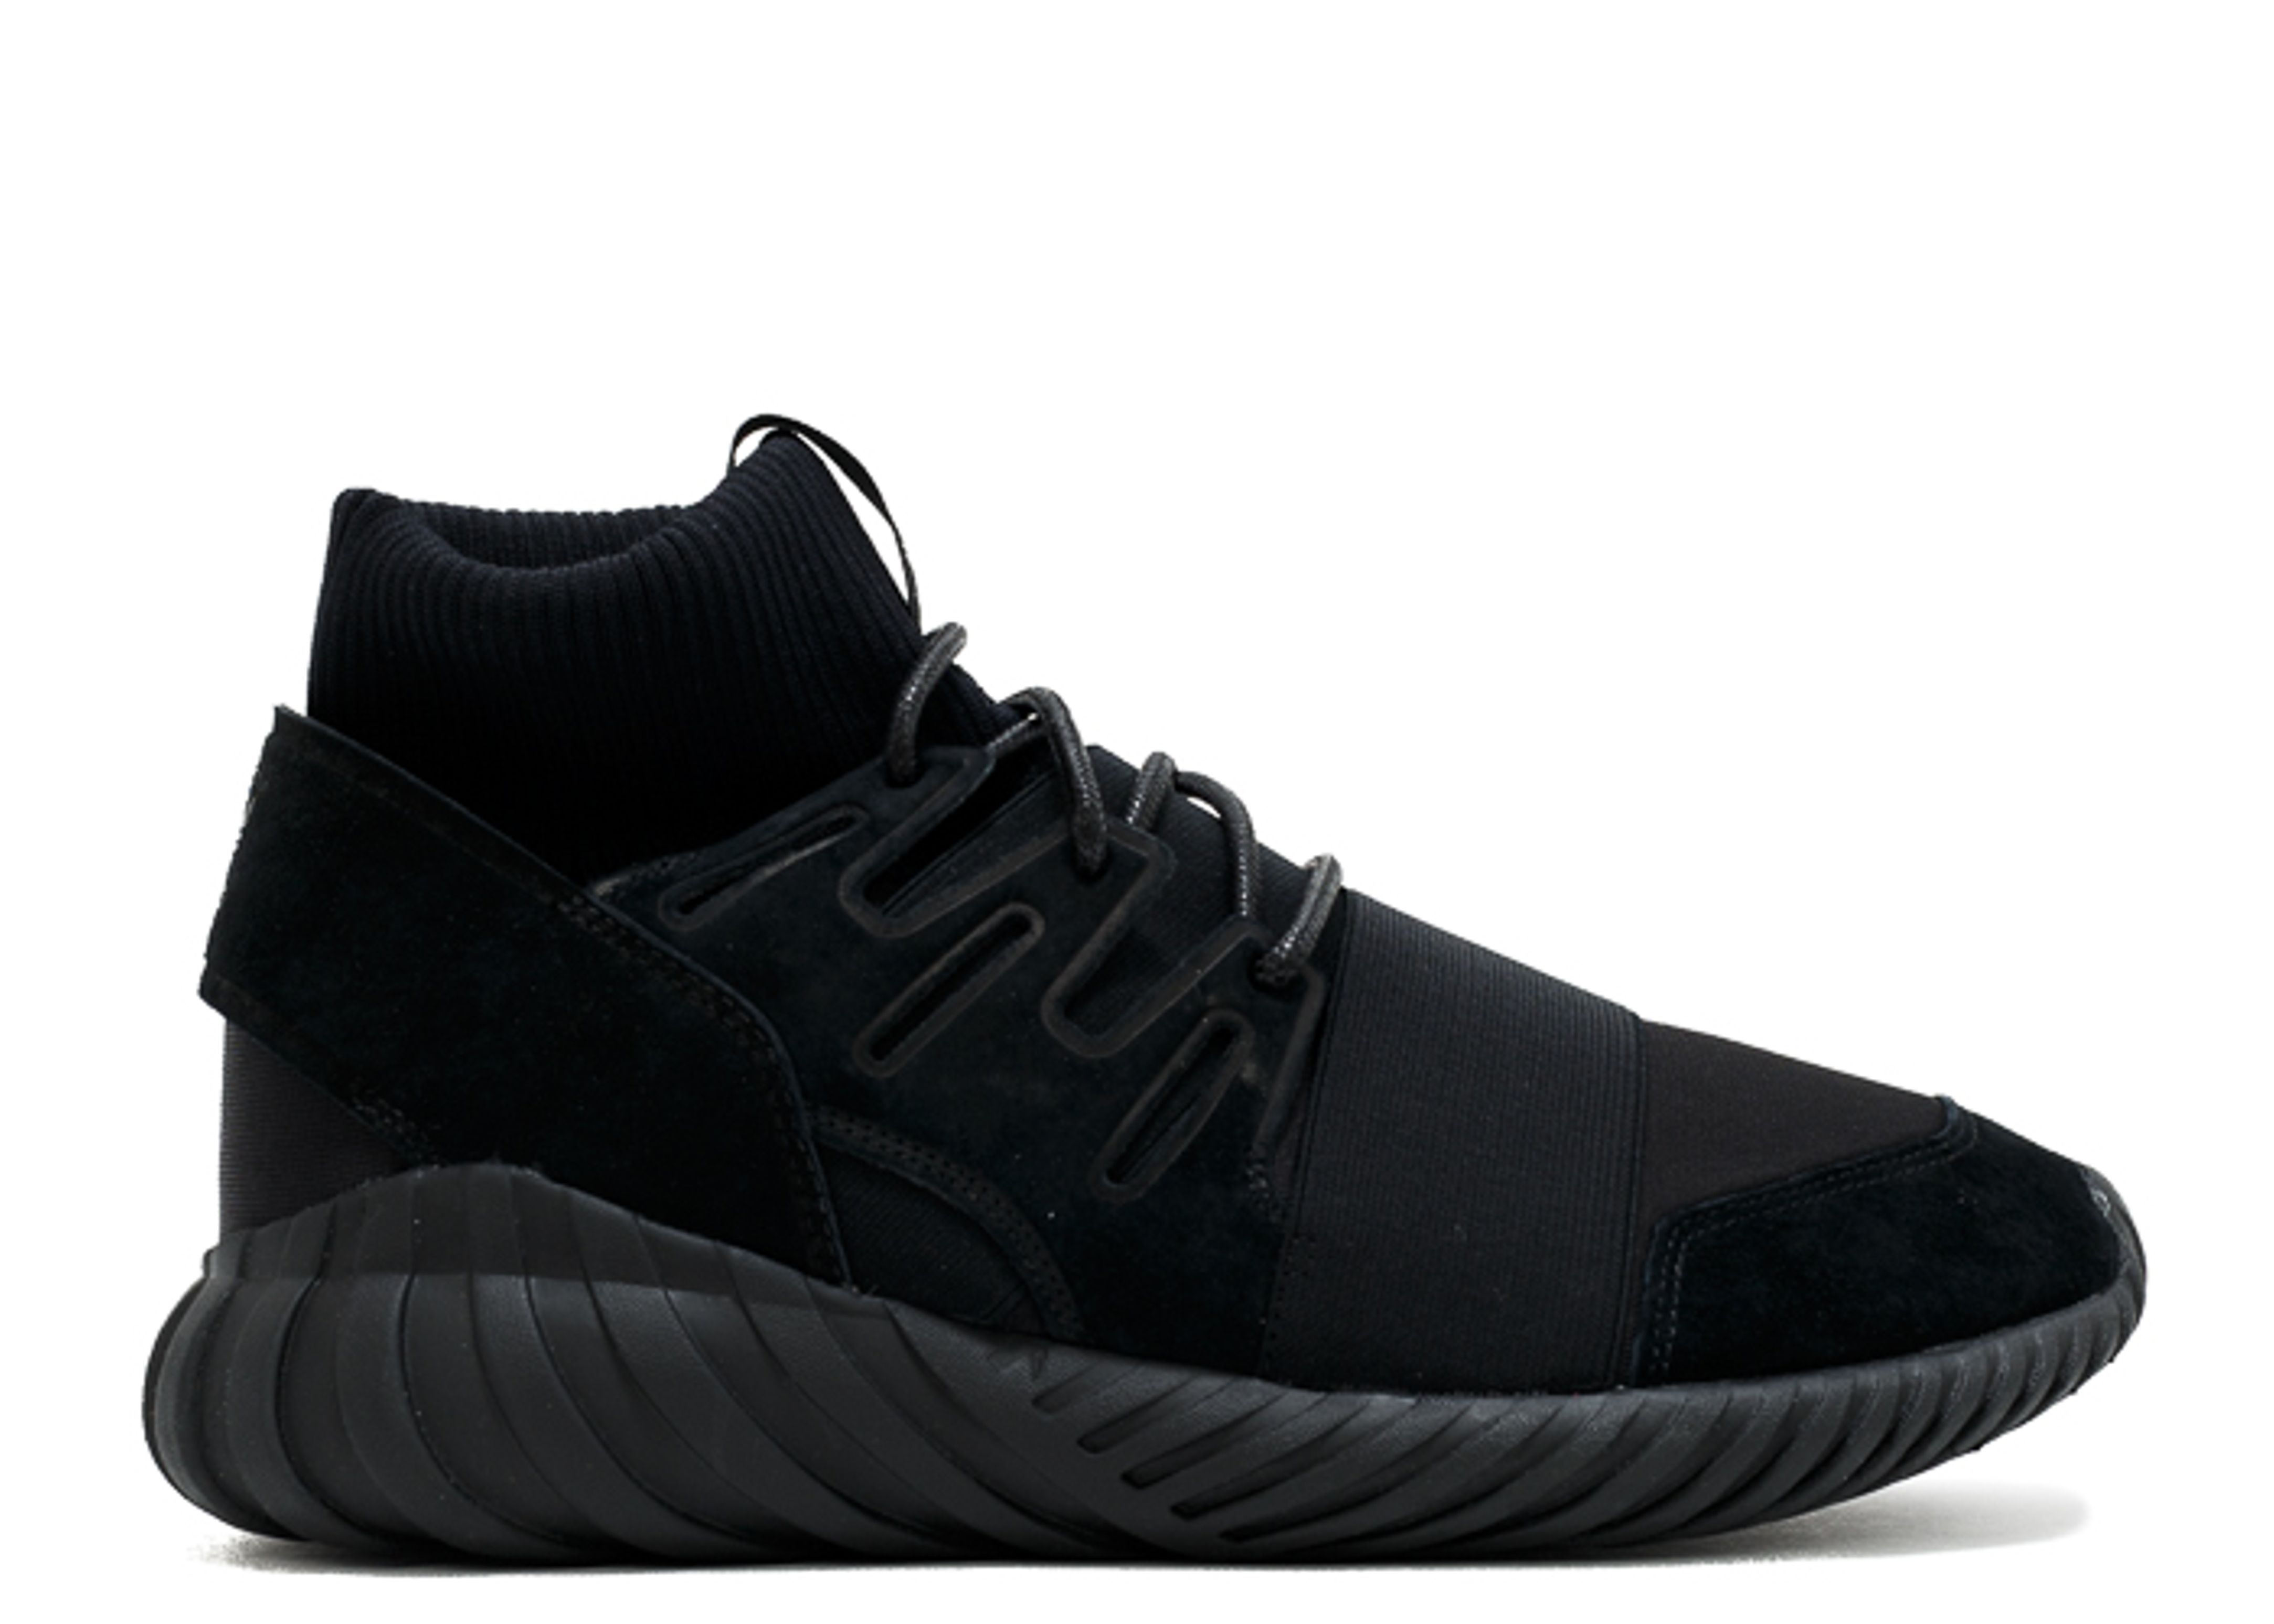 Hairy Suede Lands On The adidas Tubular Instinct Boost